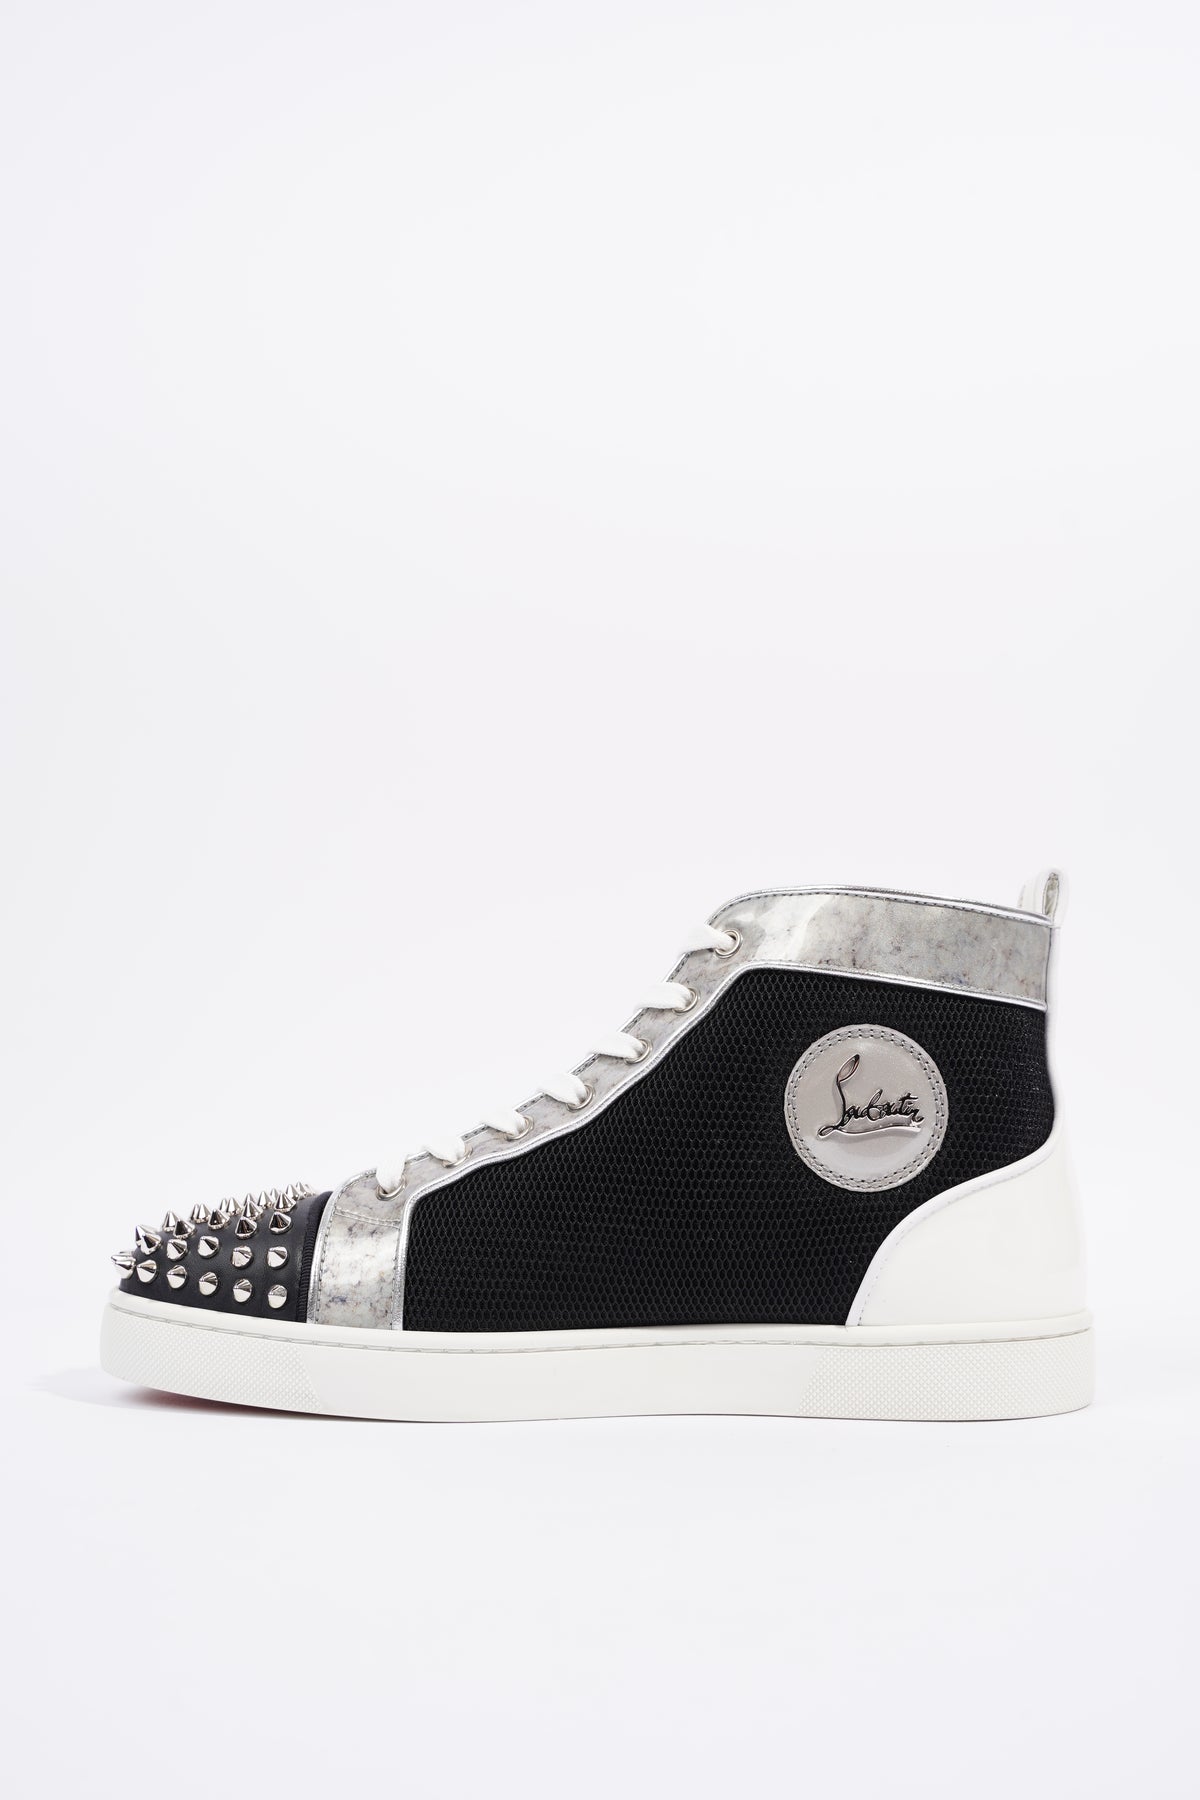 Christian Louboutin Black Leather Louis Spikes High-Top Sneakers Size 39.5  Christian Louboutin